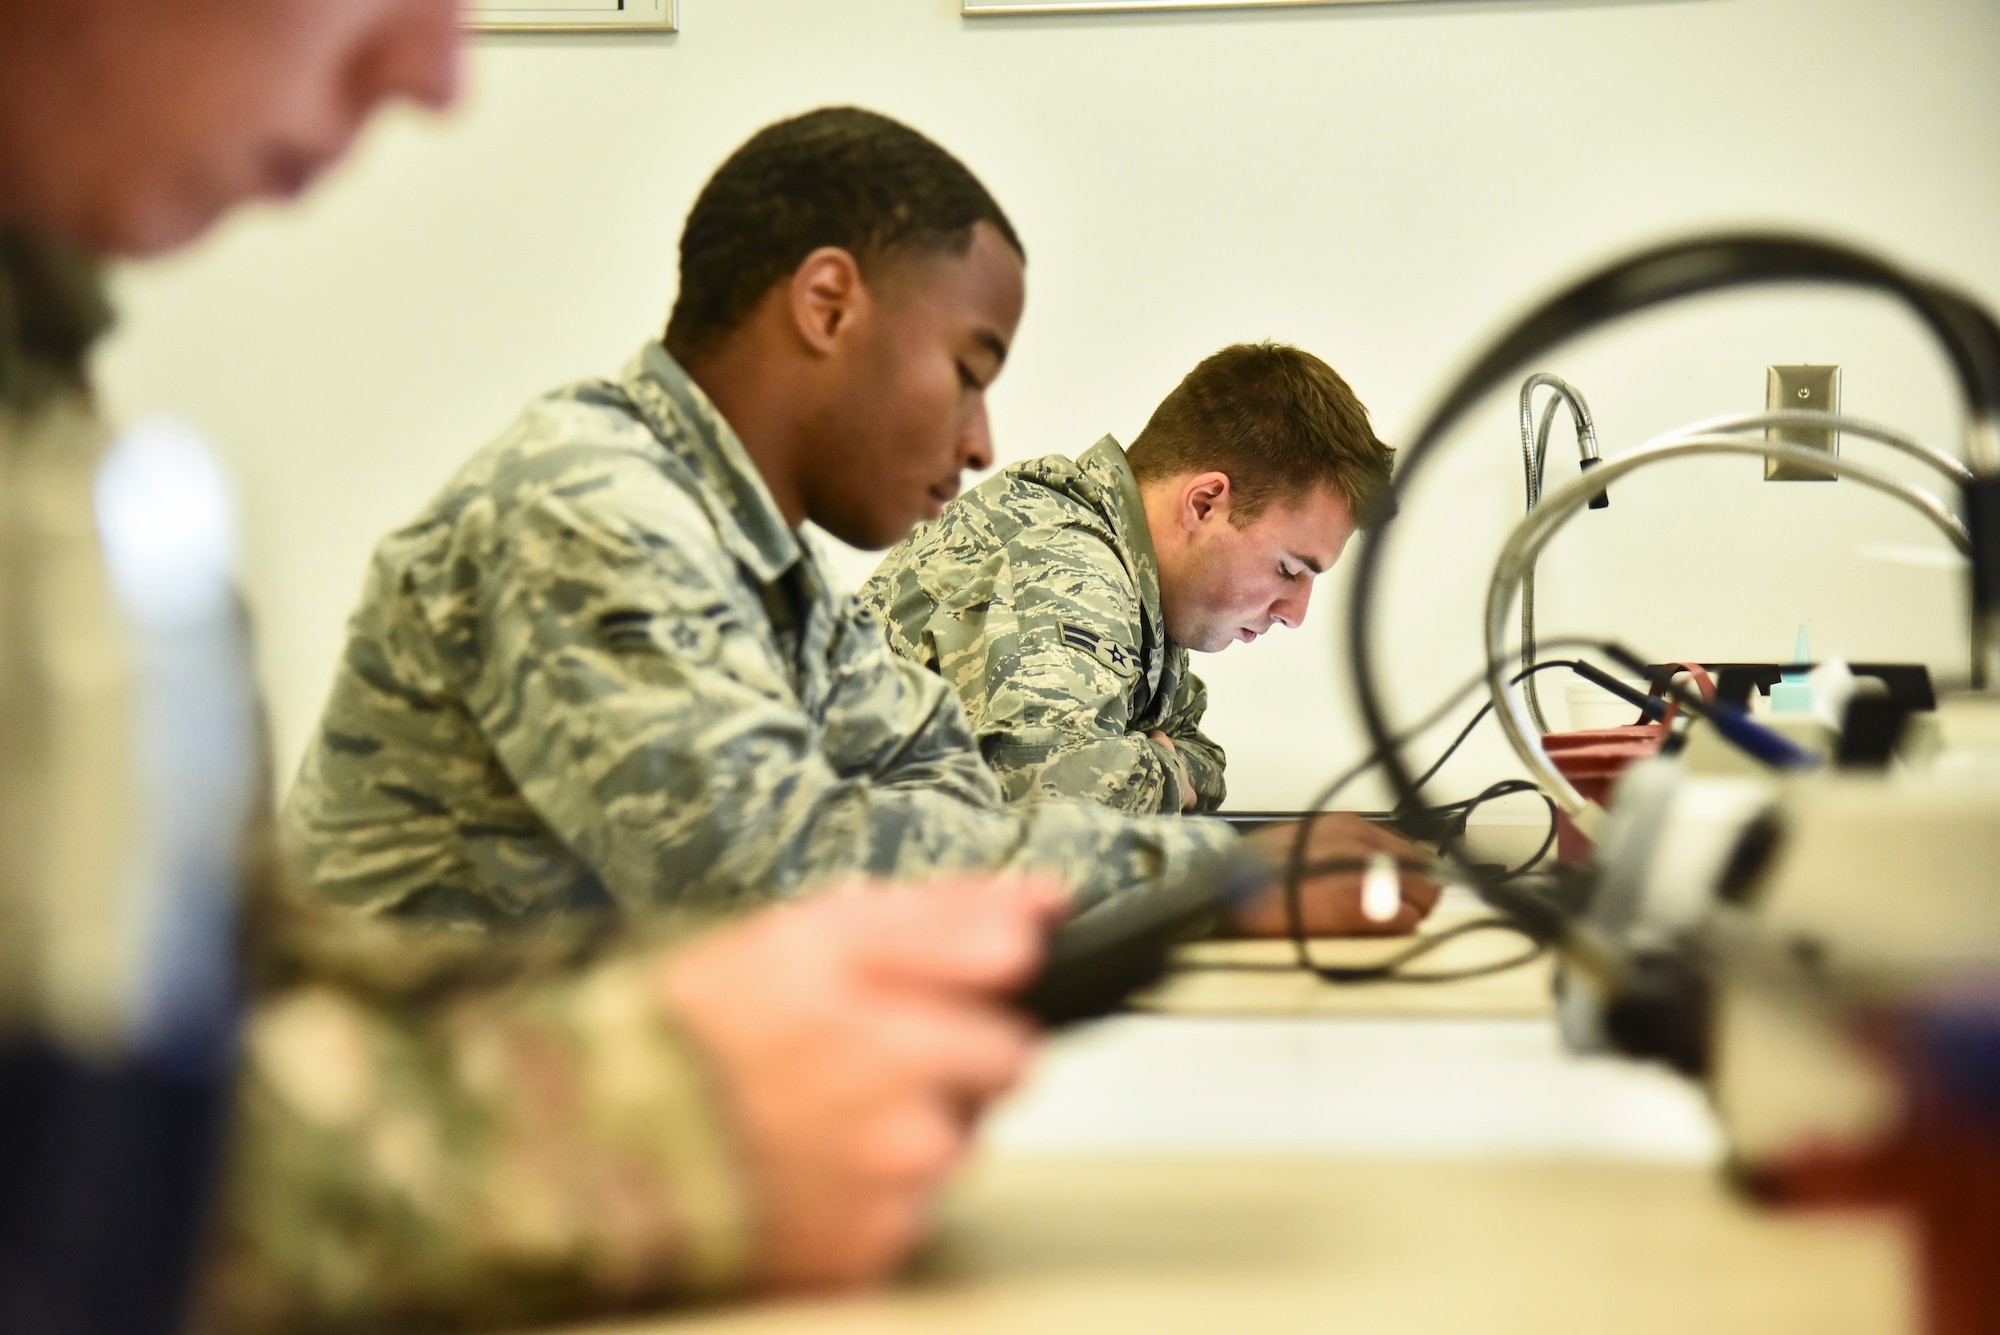 Students assigned to the 372d Training Squadron, Detachment 11, attend an advanced wire maintenance course at Davis-Monthan Air Force Base, Ariz., June 4, 2019. The 372d TRS, Det. 11, is a unit specifically dedicated to improving maintenance Airmen skills surrounding the many lethal aircraft assigned to the 355th Wing at D-M. (U.S. Air Force photo by Senior Airman Mya M. Crosby)